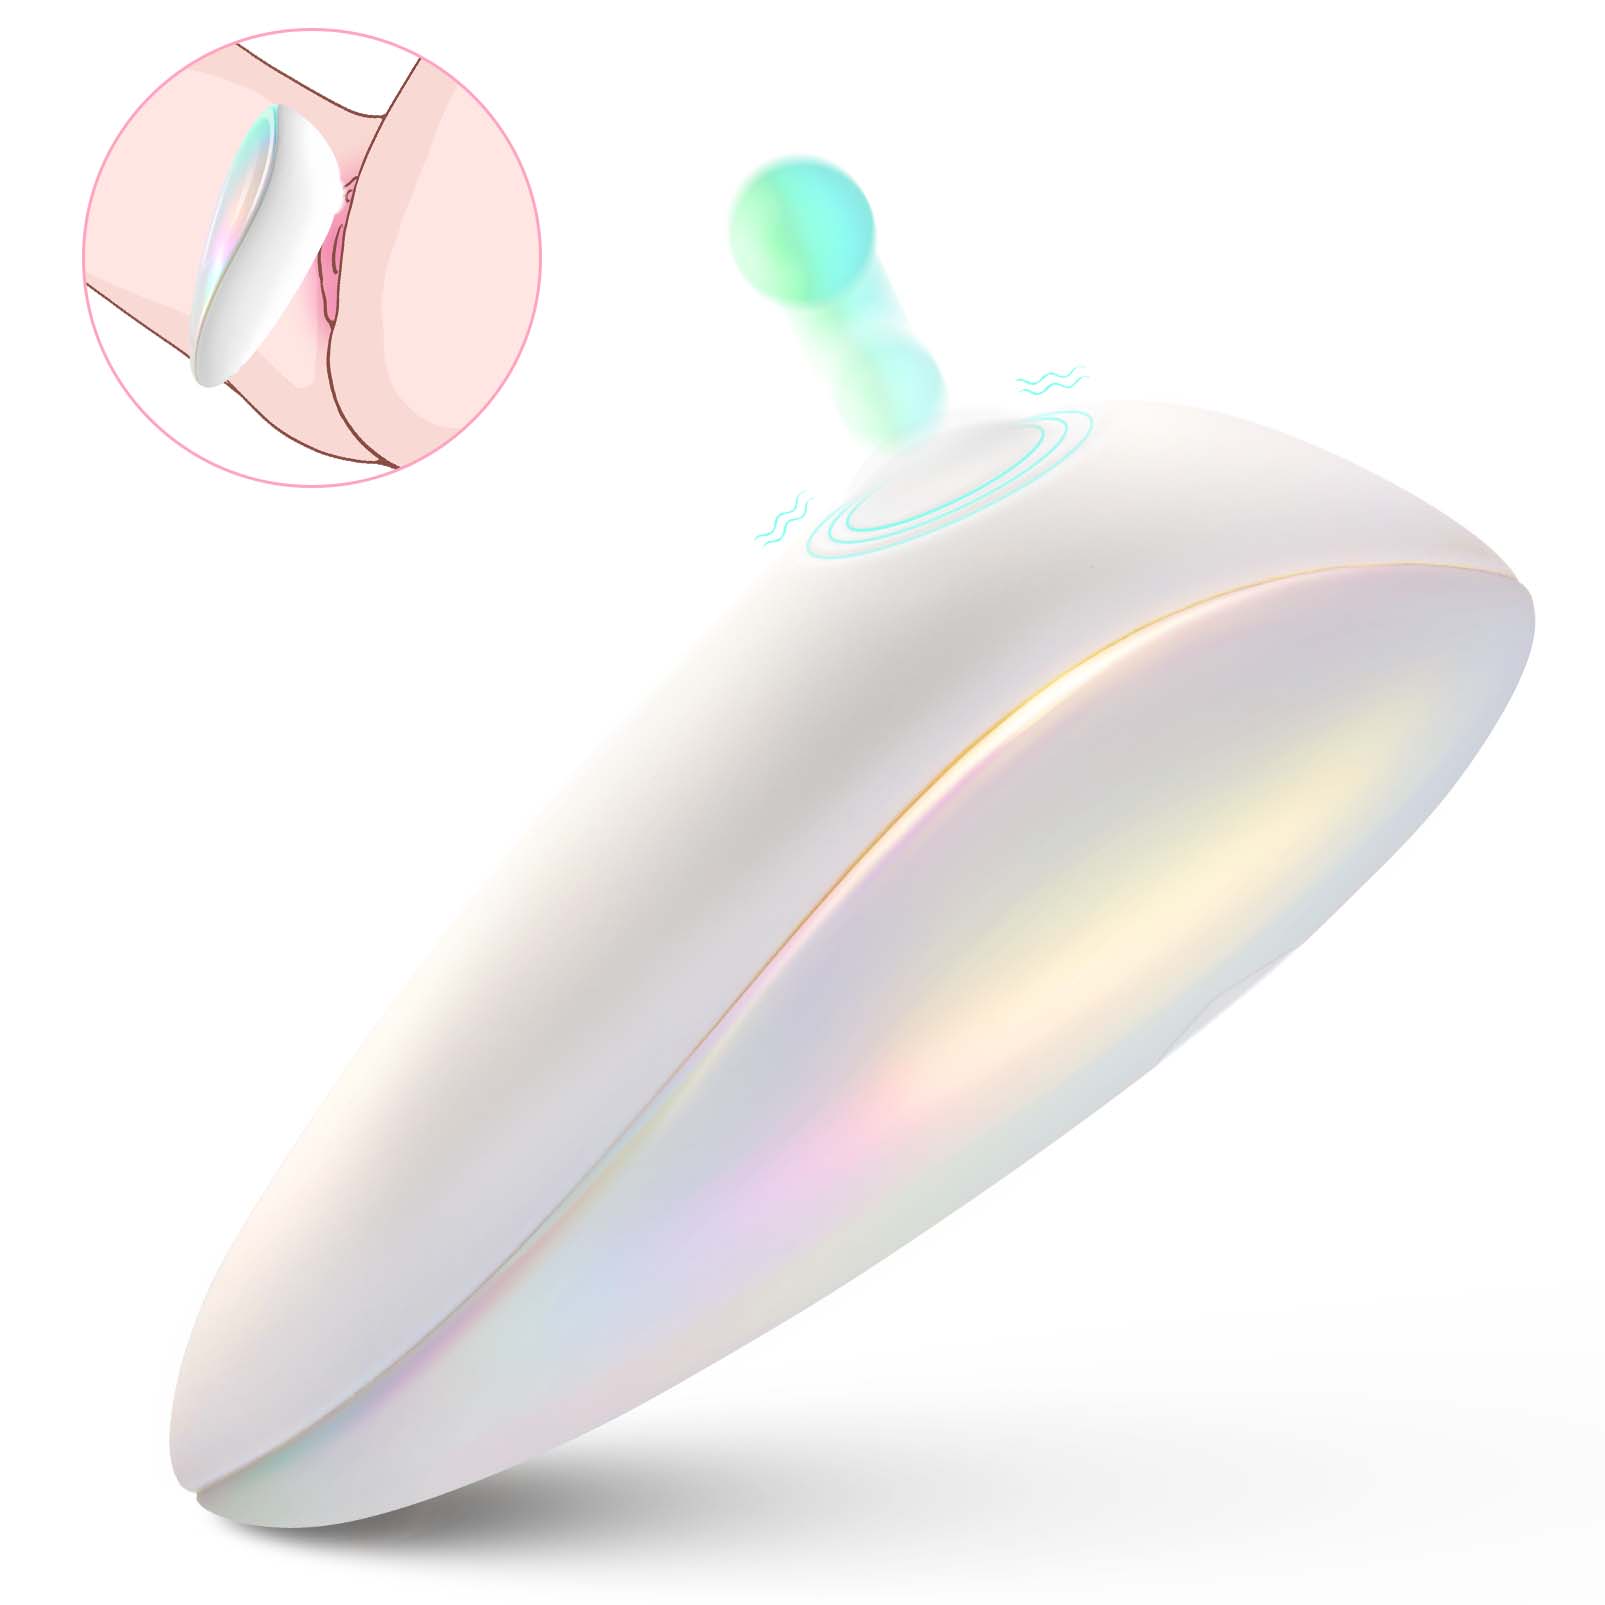 Vibrator Adult Sex Toys for Women - Clitoral Nipple Vibrators with 9 Flapping Vibrating Modes Adult Sex Toy, Tapping Clit G spot Sex Stimulator Adult Toy for Female Men Couple Pleasure, White